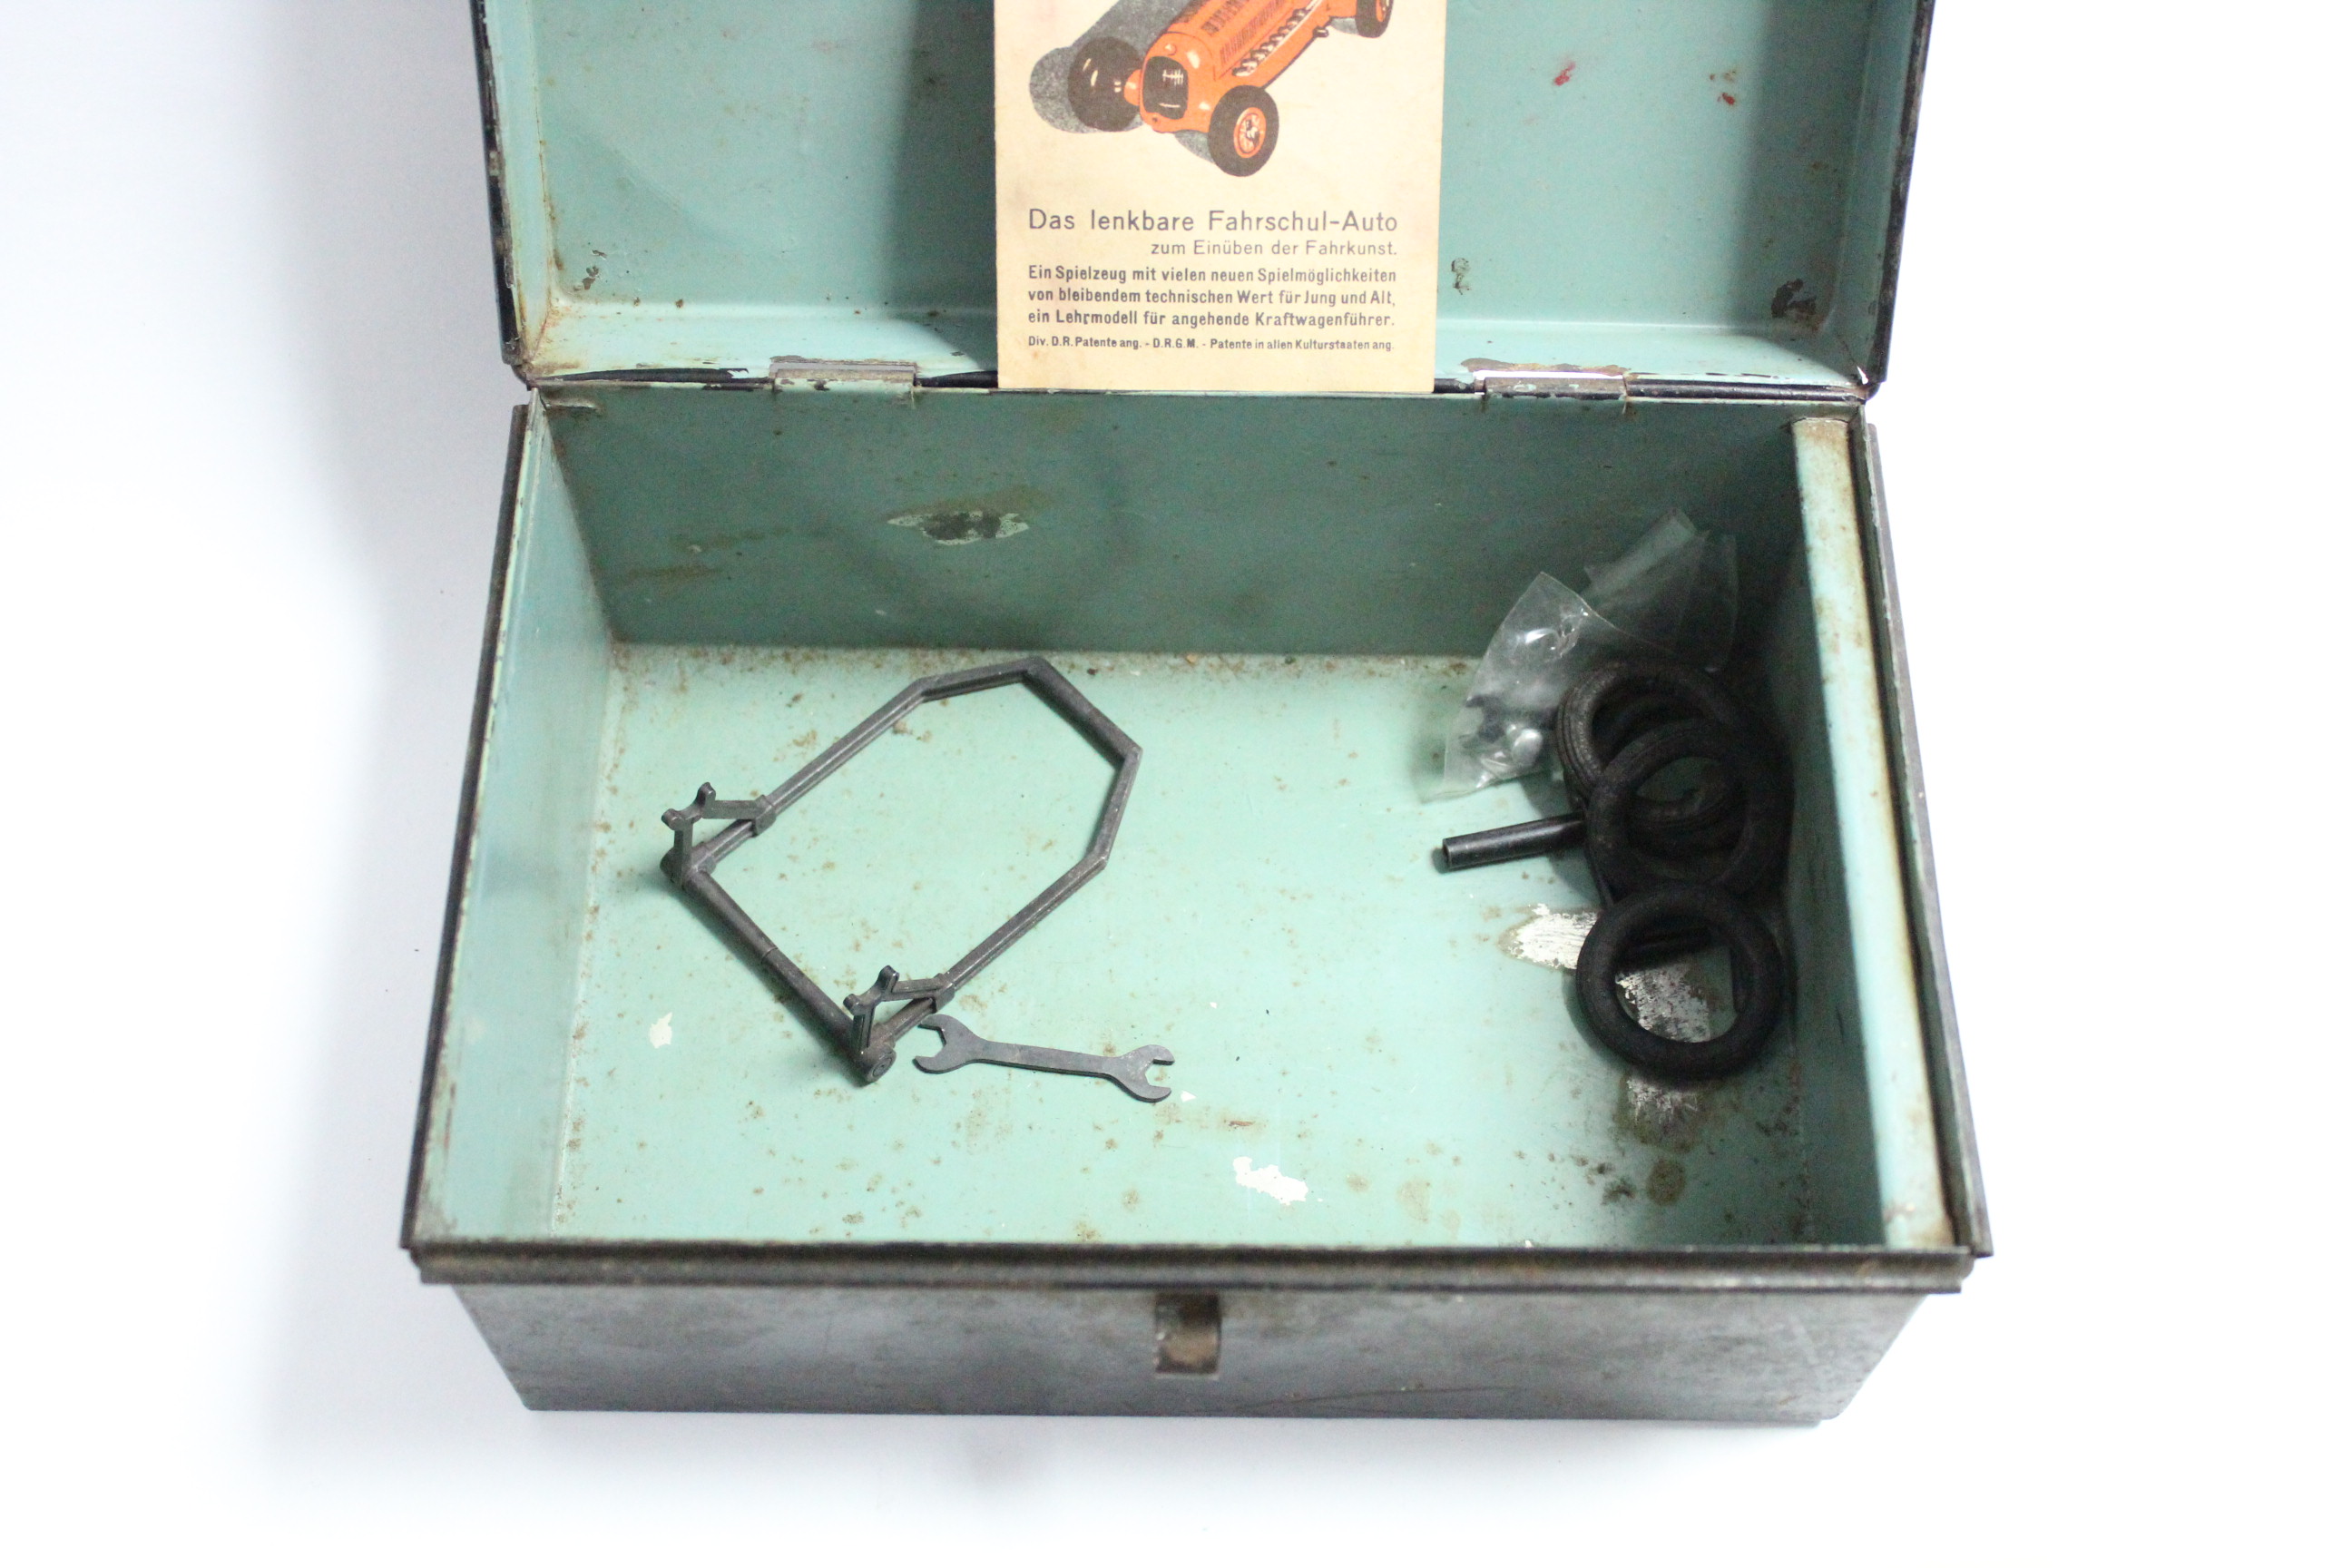 Two Schuco Studio clockwork operated tinplate racing cars, un-boxed. - Image 4 of 4